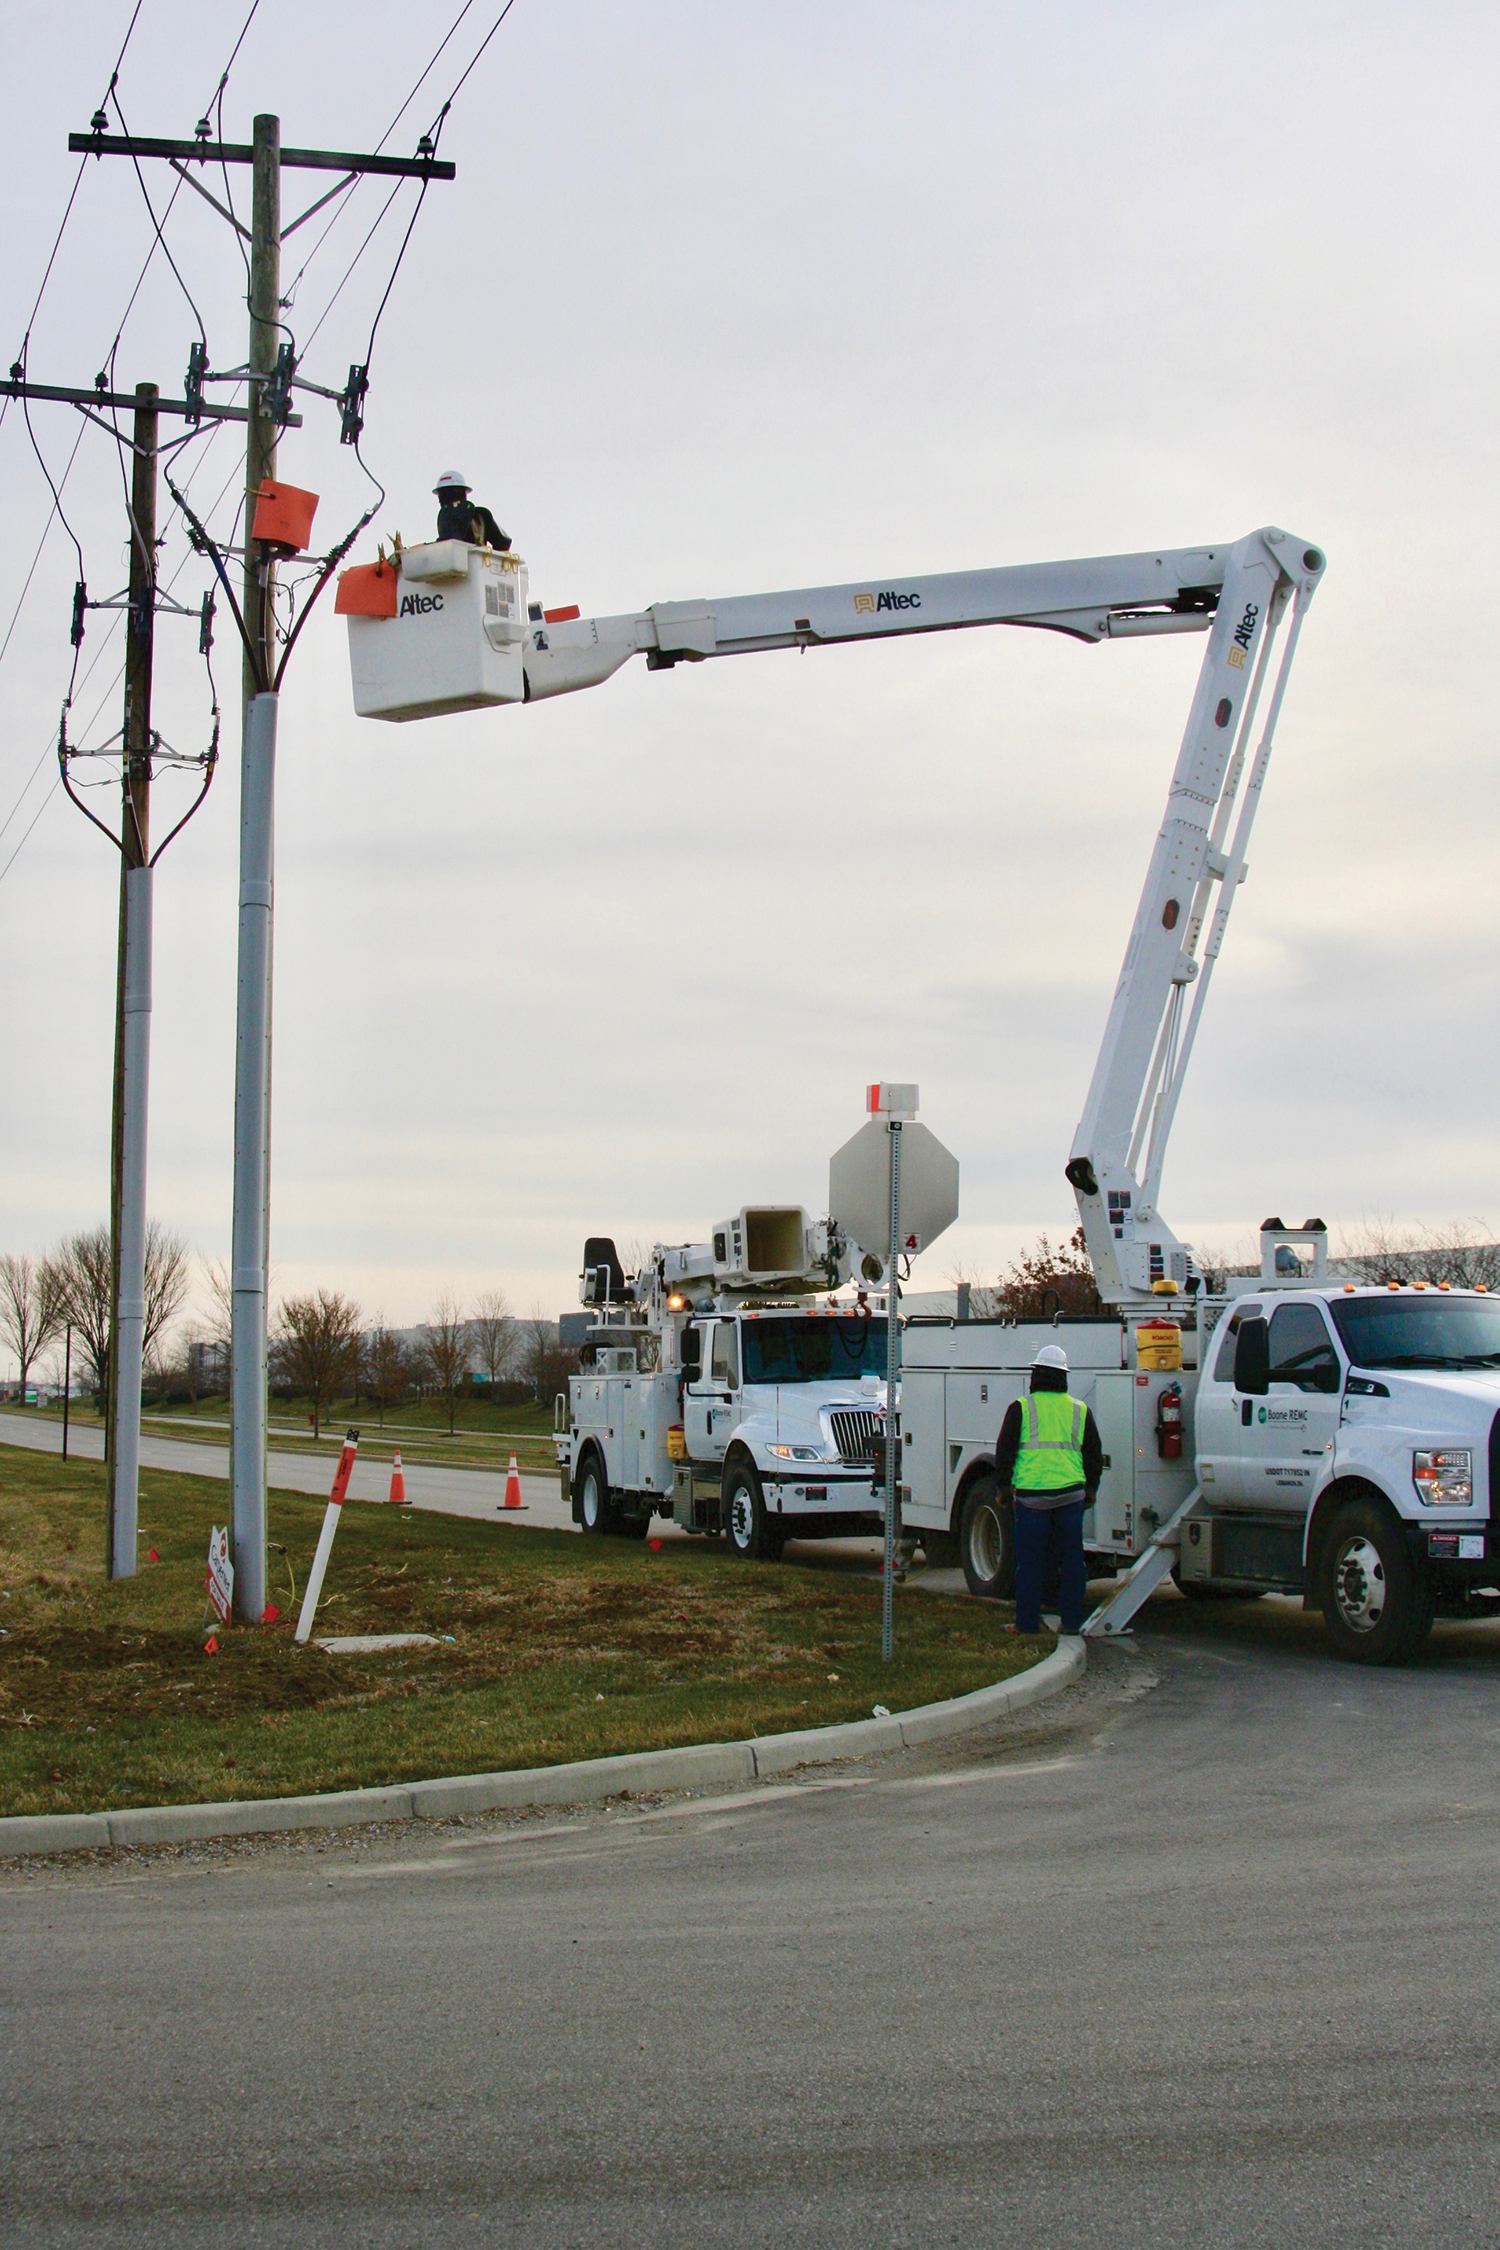 Linemen working on a power pole